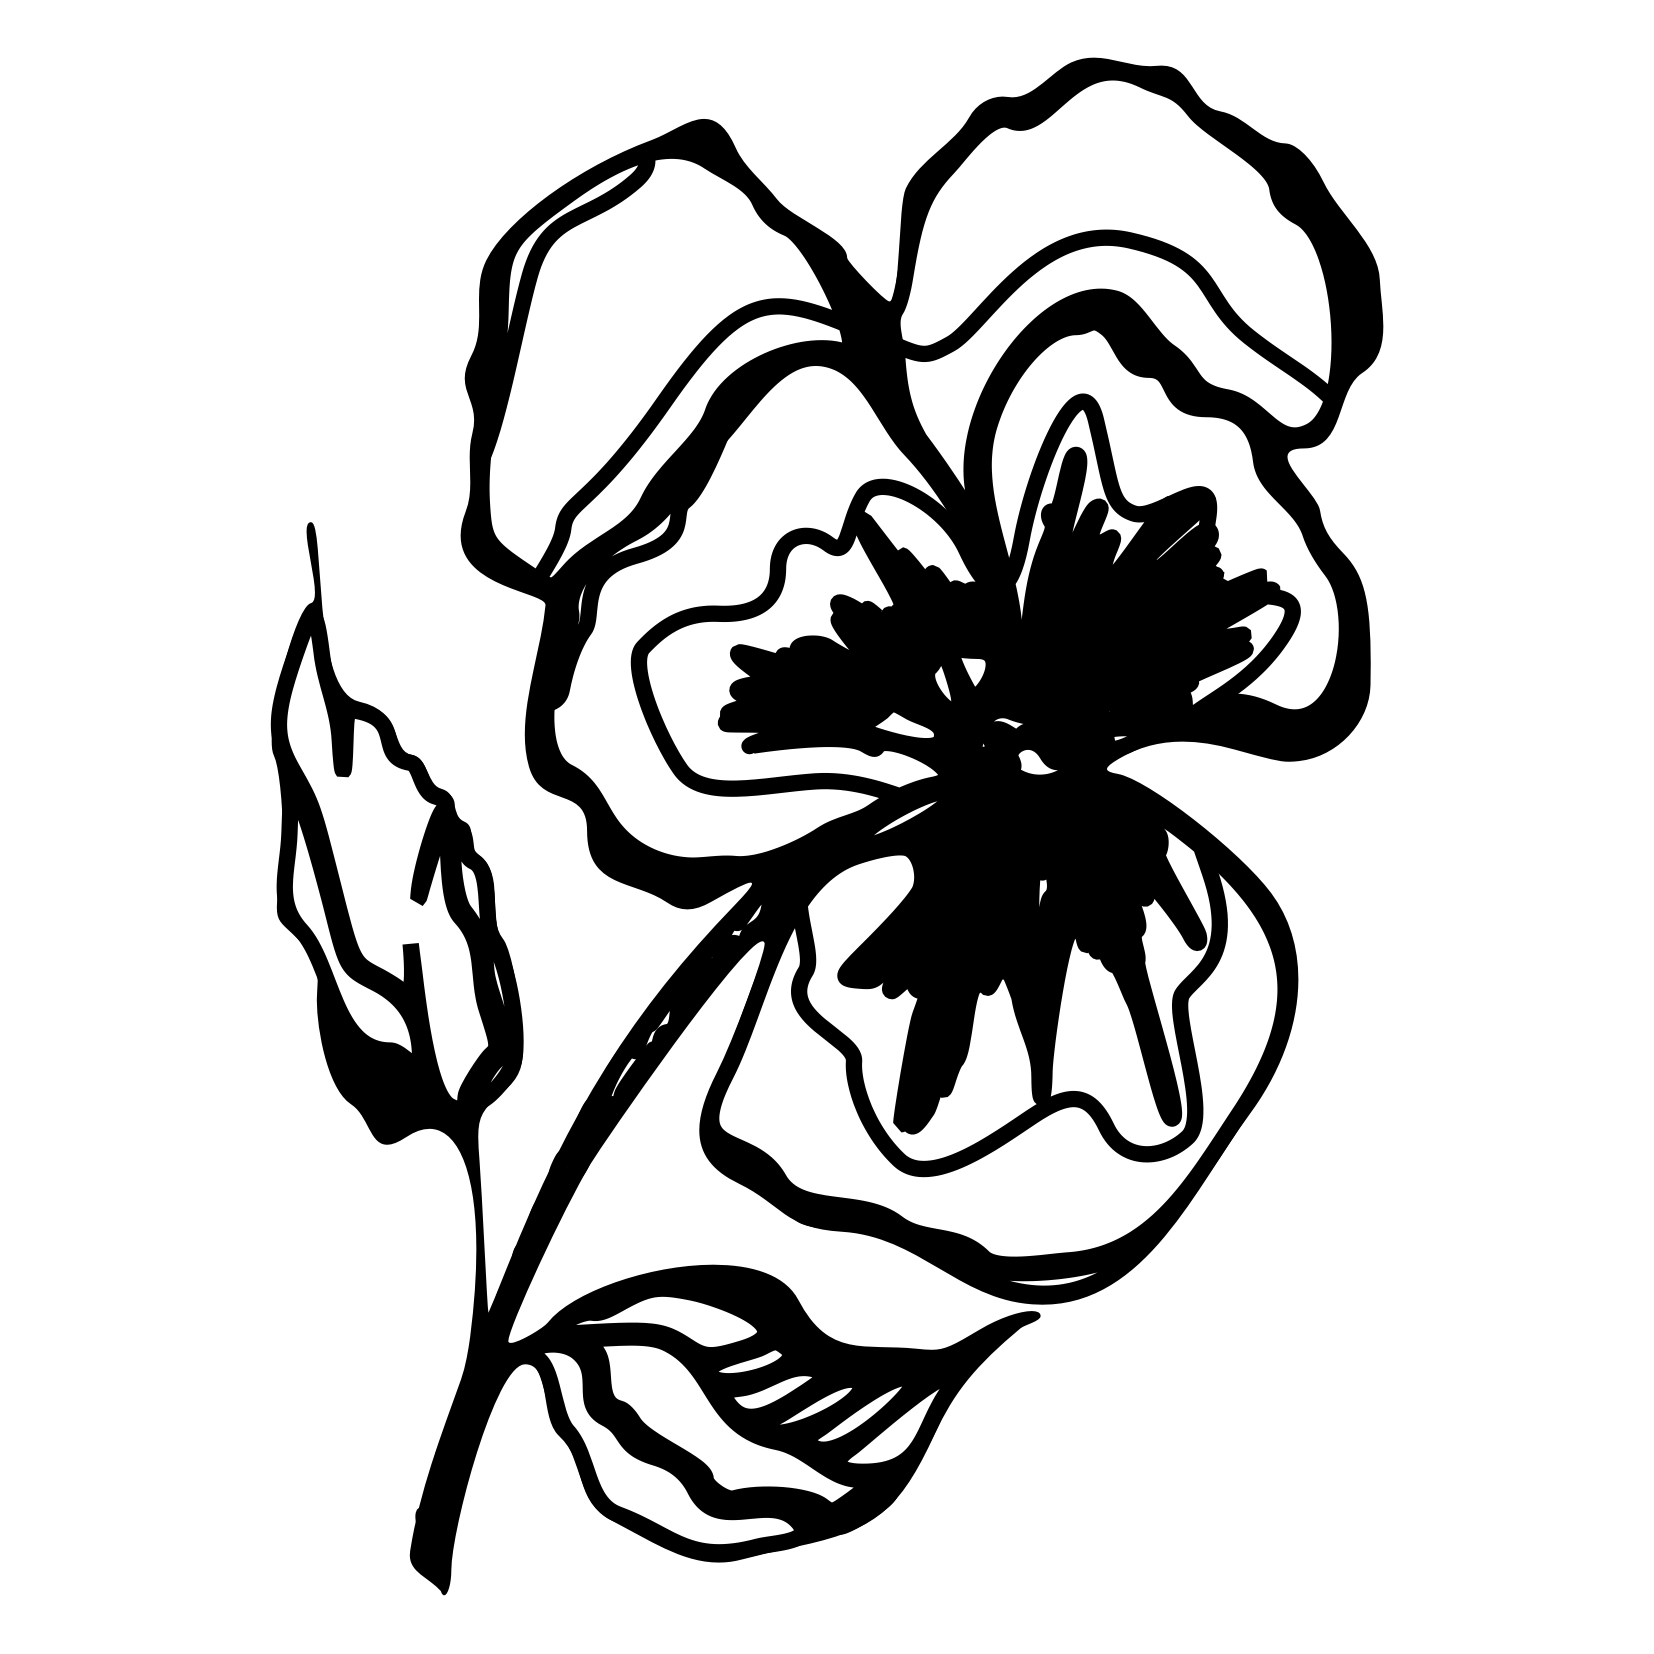 Coloring pages Flowers - free downloads